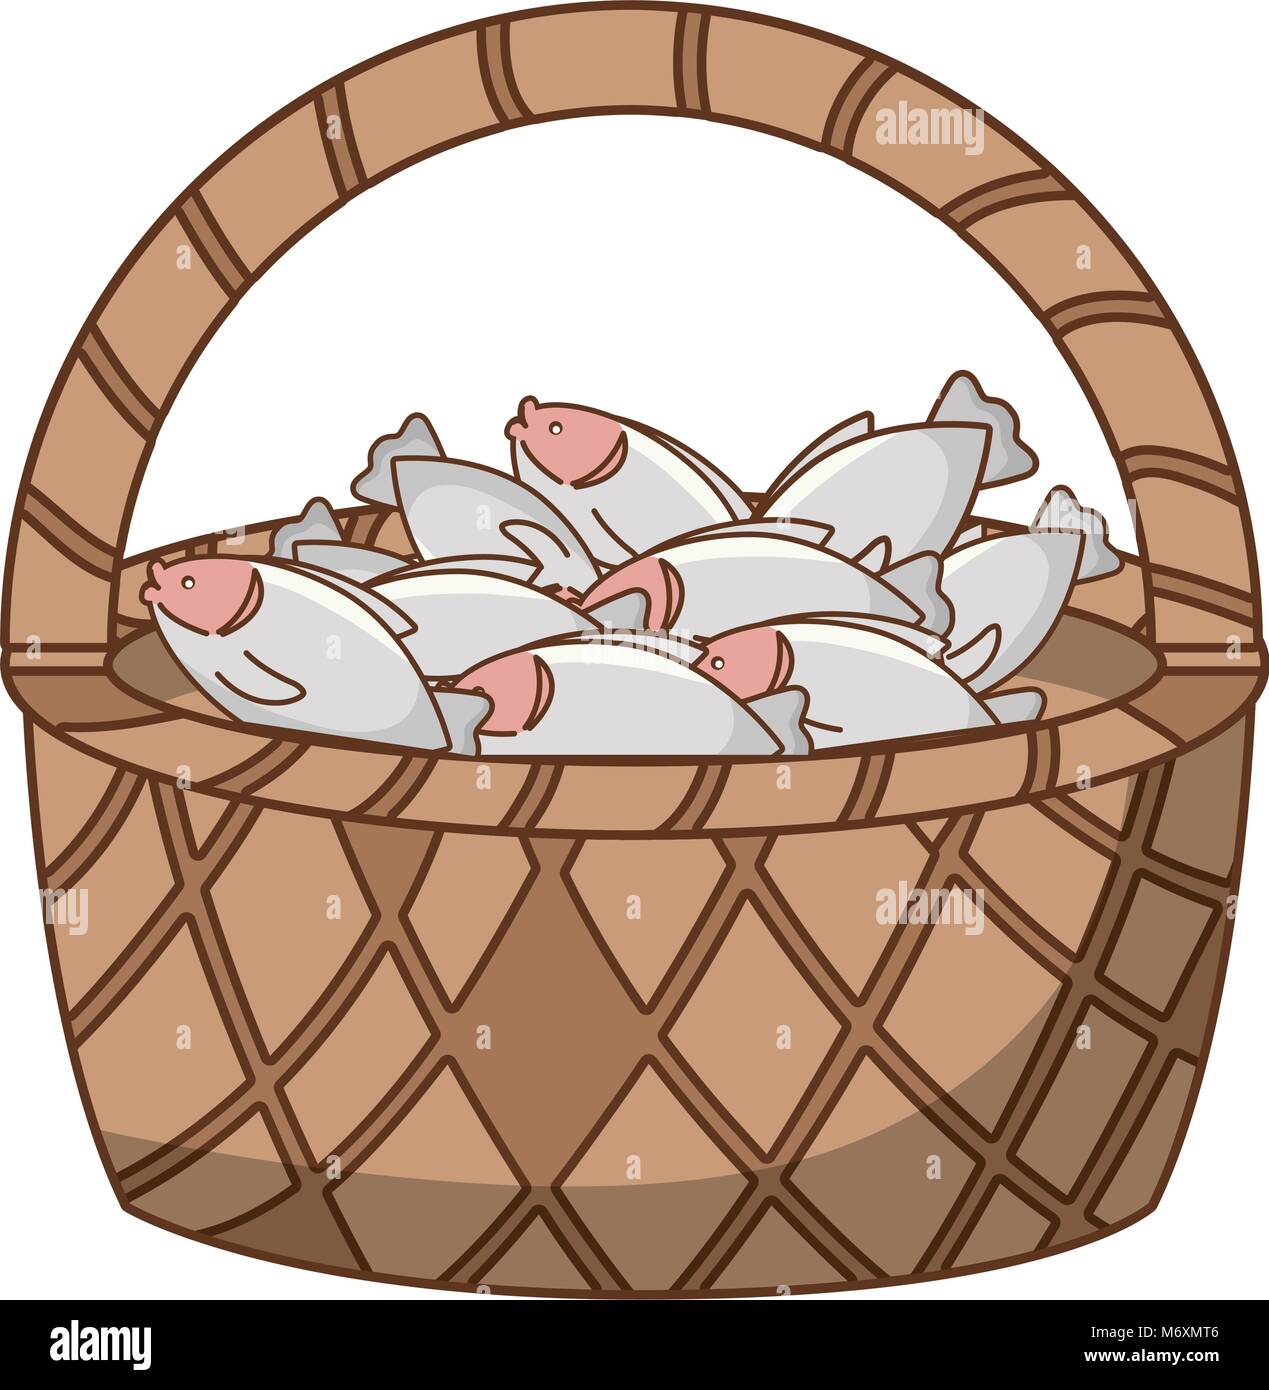 Basket with fish over white background, colorful design vector